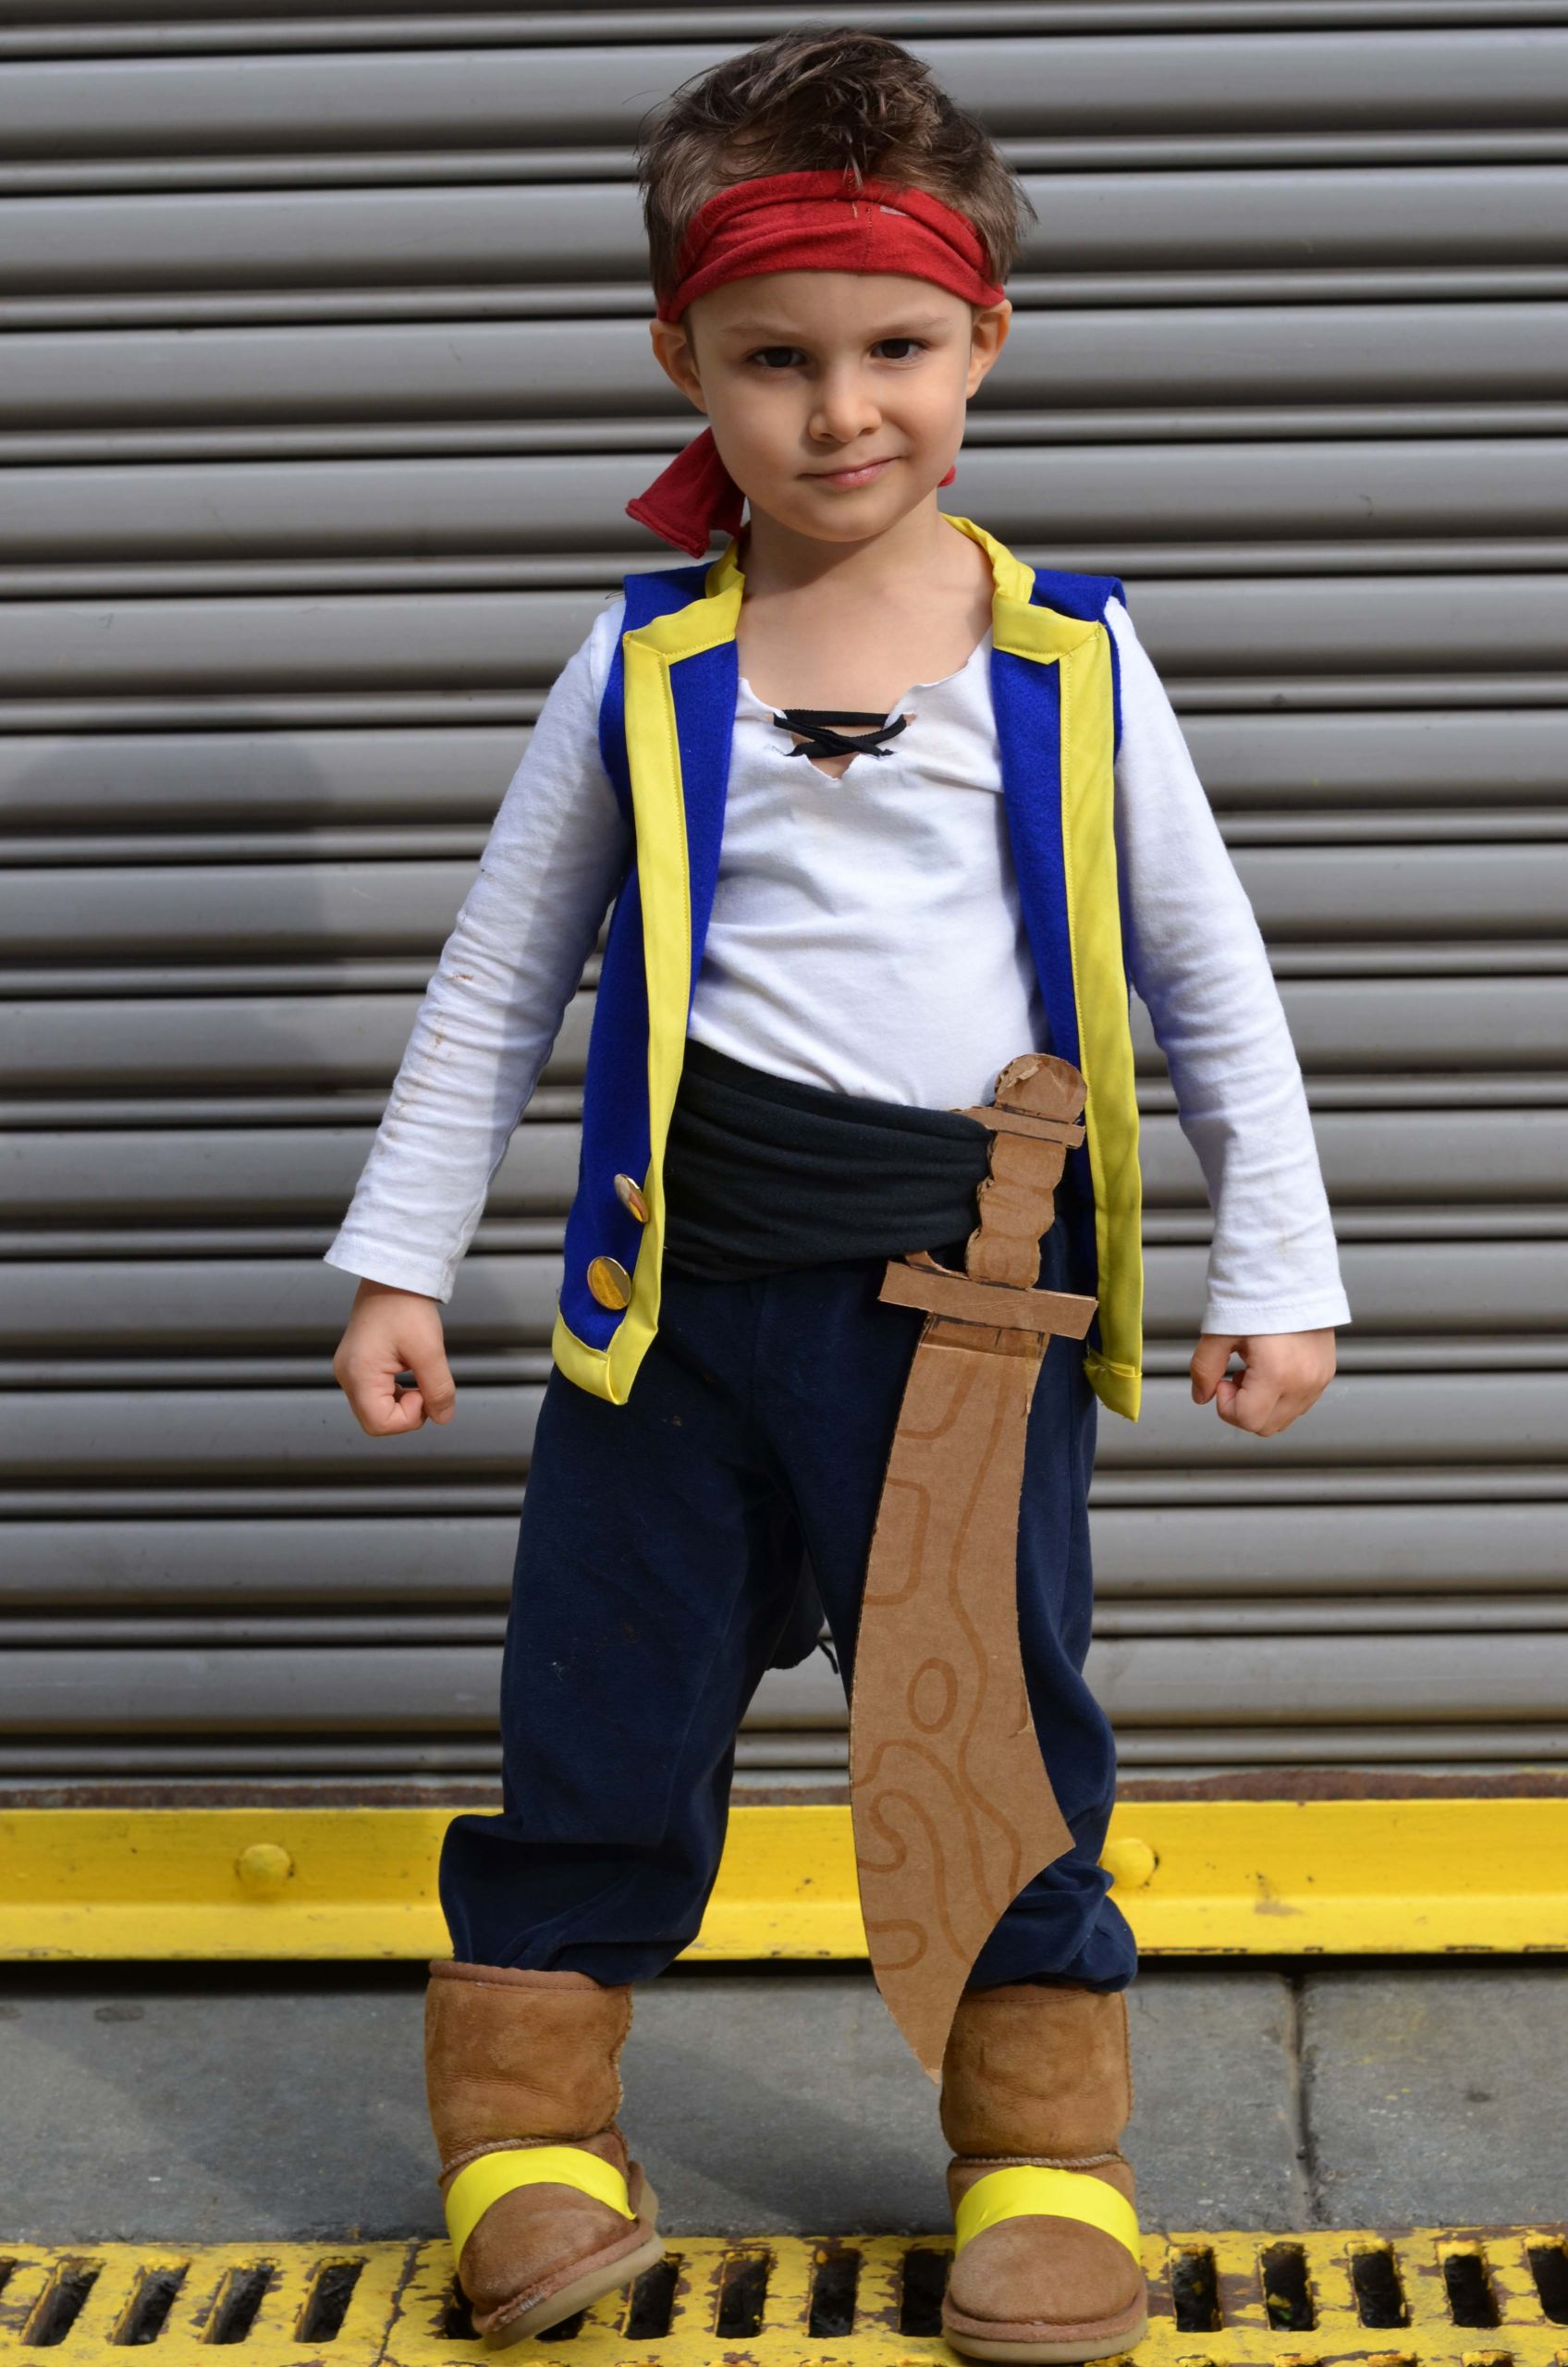 DIY Halloween Costumes For Toddler Boys
 Jake and The Never Land Pirates